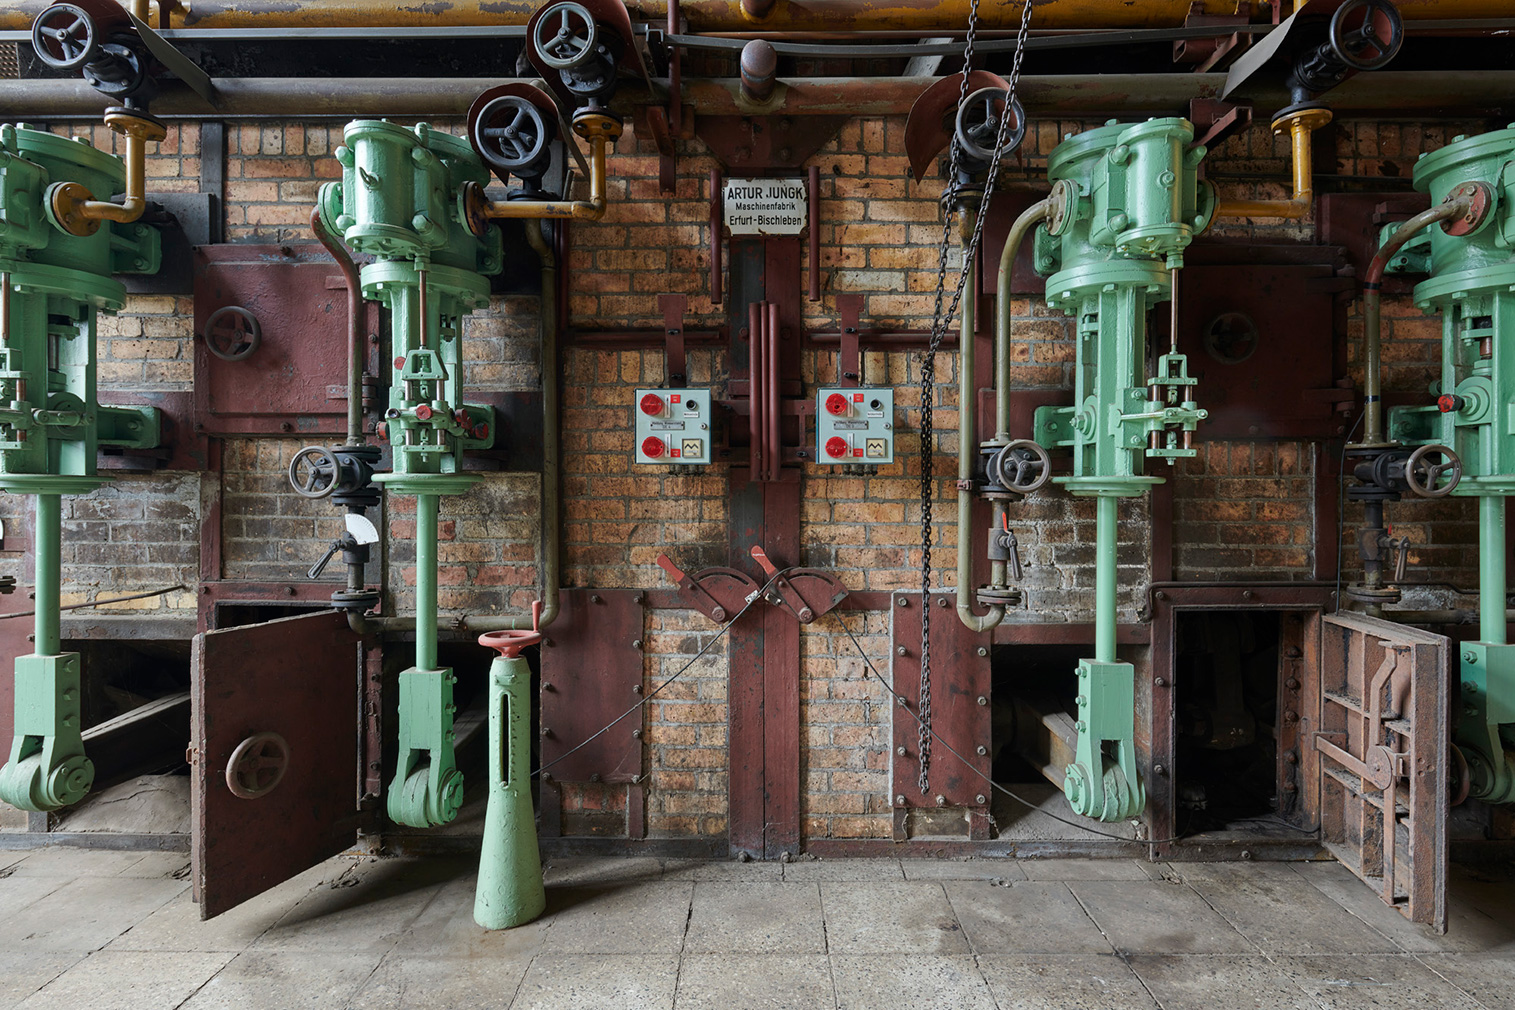 A defunct power plant is being transformed into an art gallery near Berlin